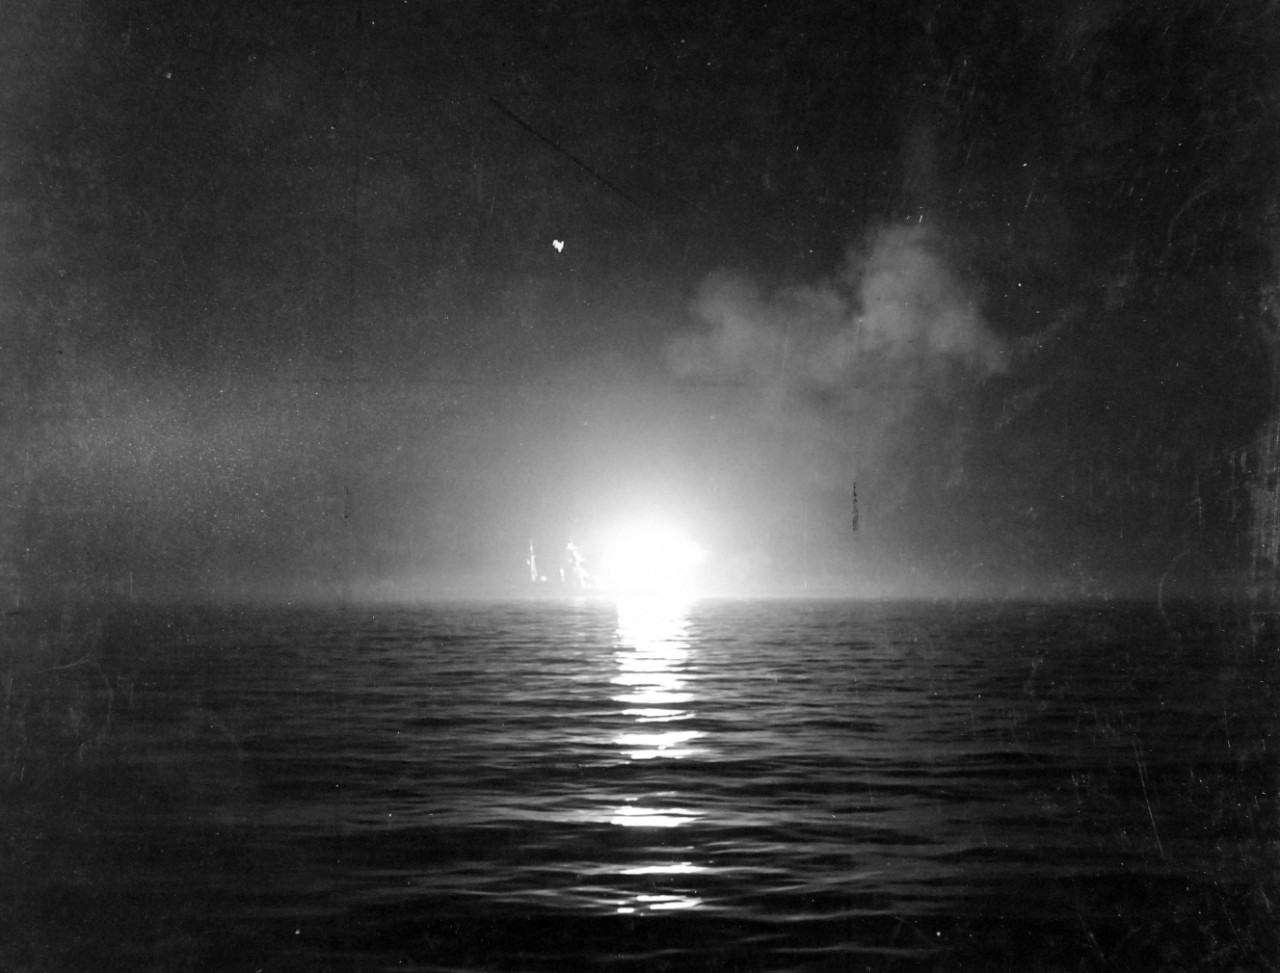 80-G-74836:   Operation Husky, July-August 1943.  Night shore bombardment by the Royal Navy monitor Abercrombie off the coast of Gela, Sicily.   Photographed by USS Boise (CL-47), July 12 1943.    Official U.S. Navy Photograph, now in the collections of the National Archives.  (2018/02/14).    